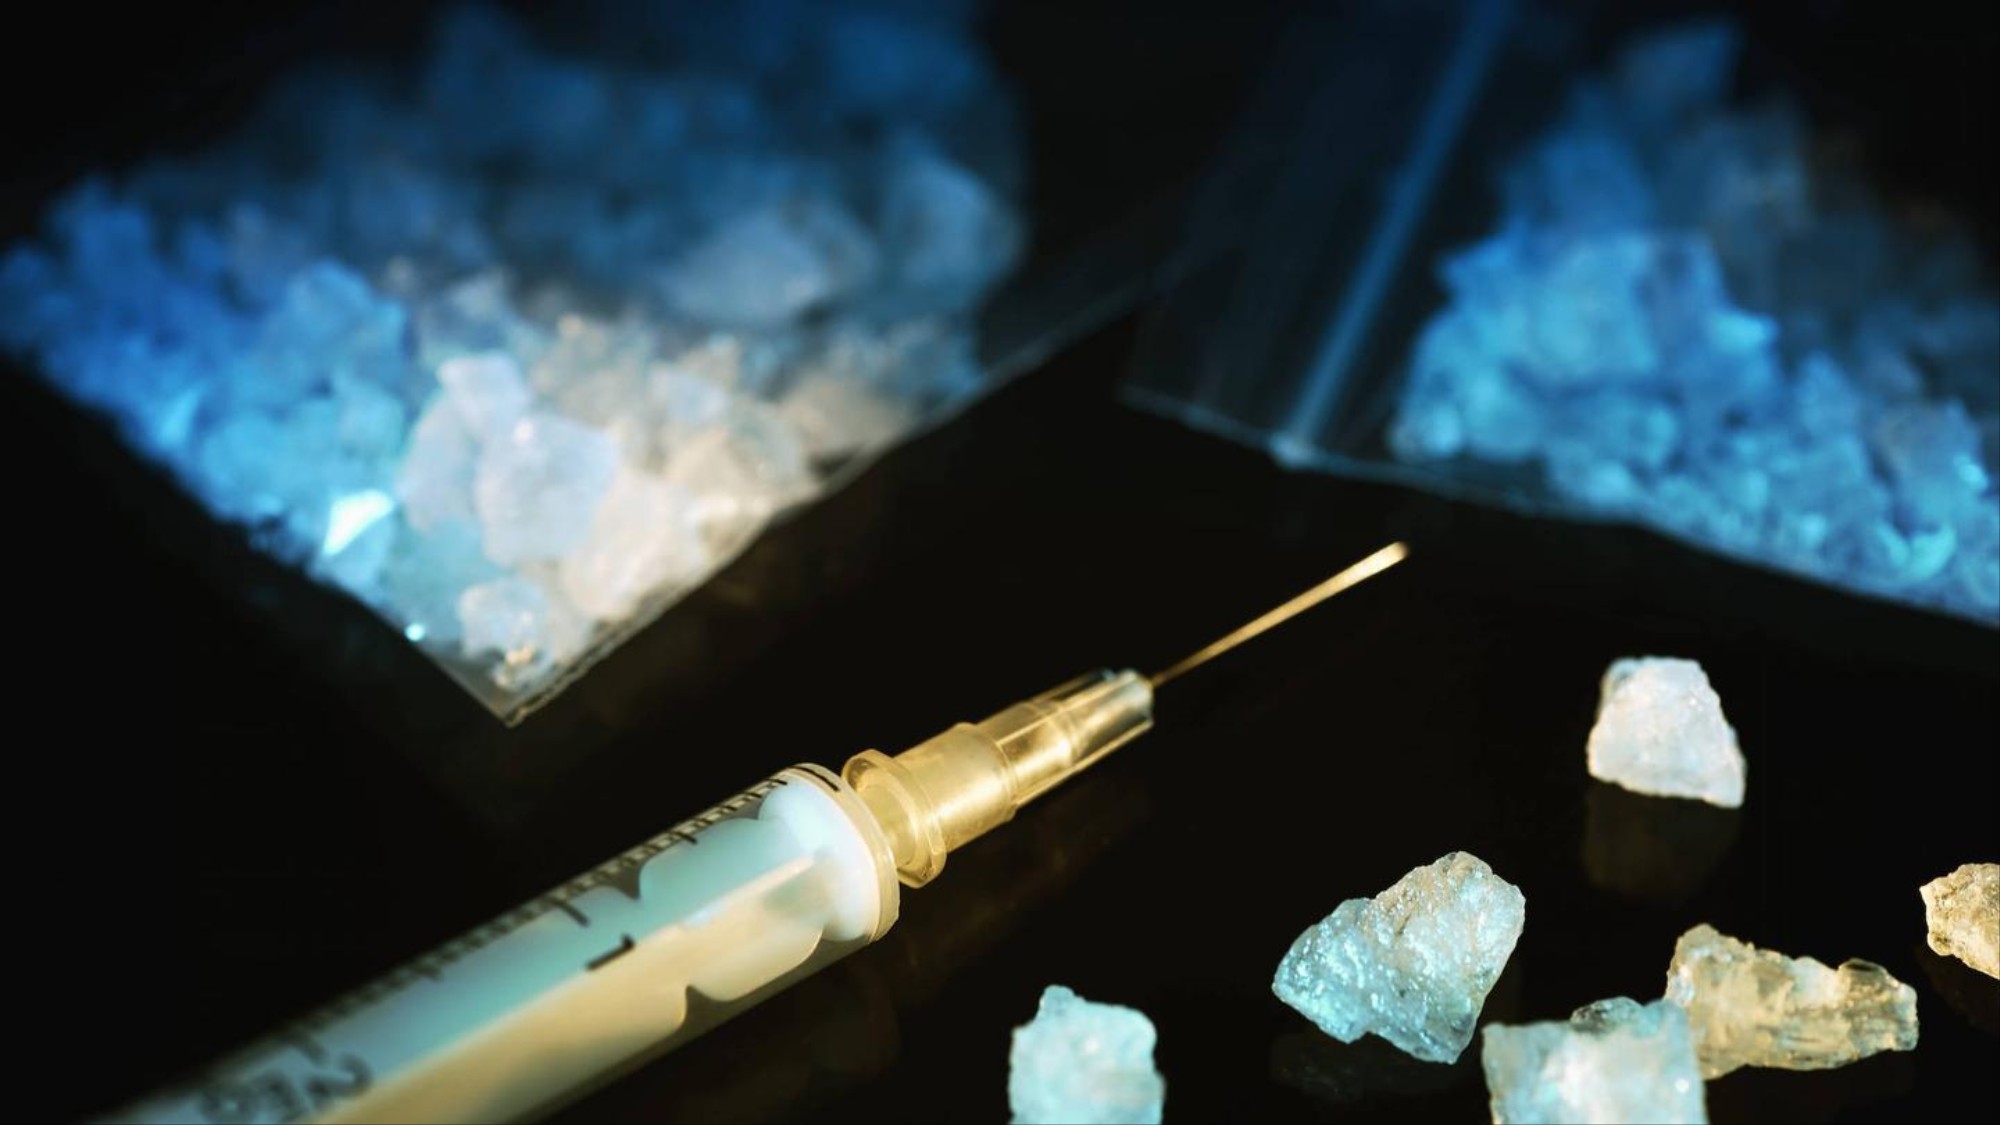 Inject Crystal Meth Porn - We Need to Talk About the Queer Community's Meth and GHB ...